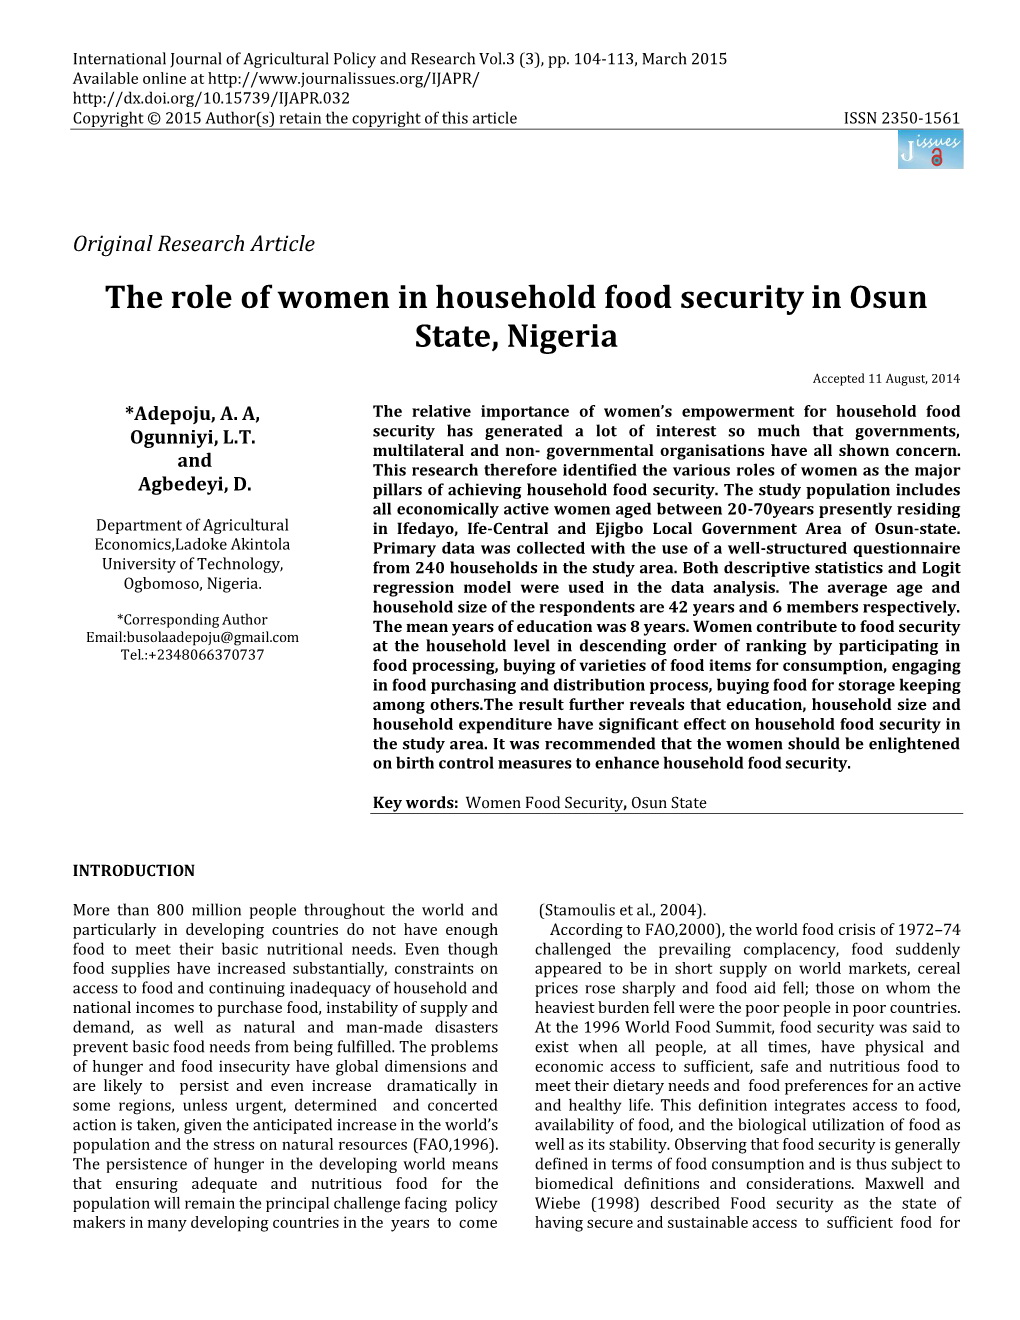 The Role of Women in Household Food Security in Osun State, Nigeria